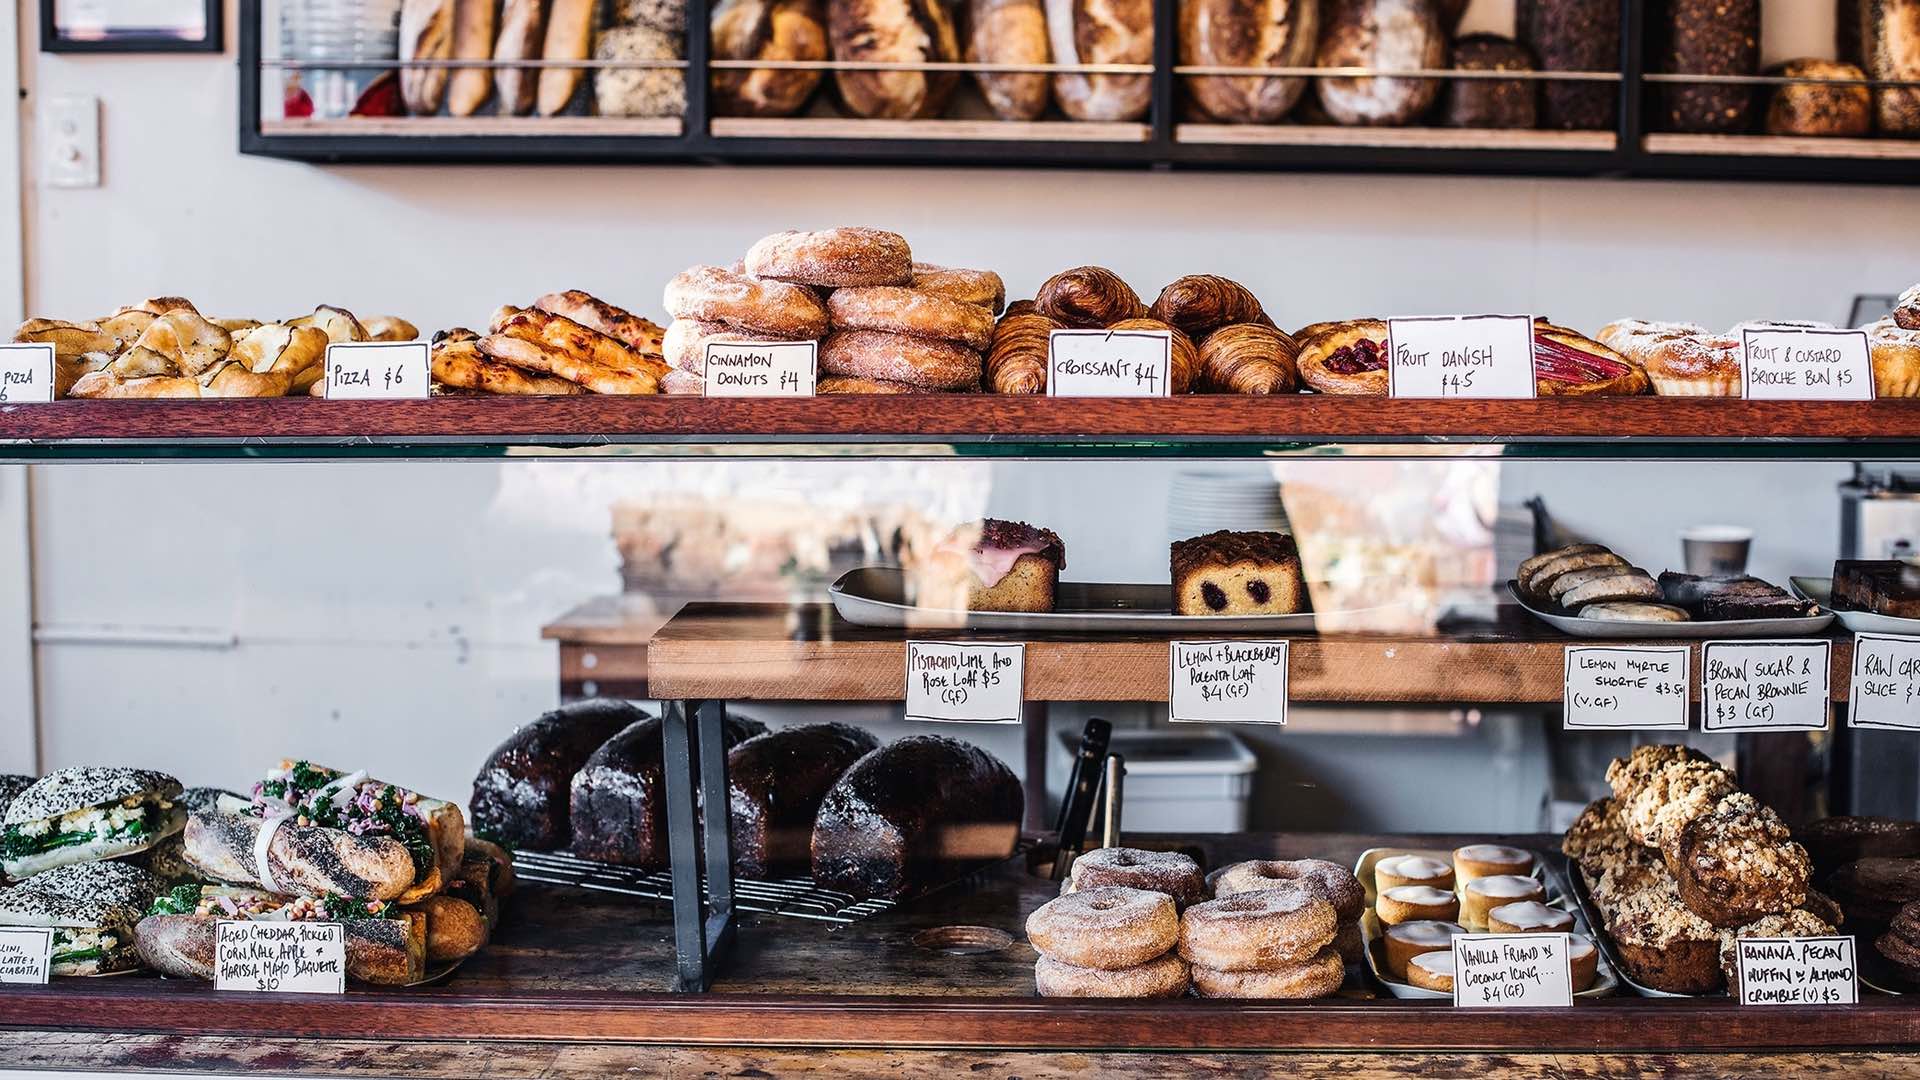 The counter at Two Chaps - home to some of the best donuts in Sydney.